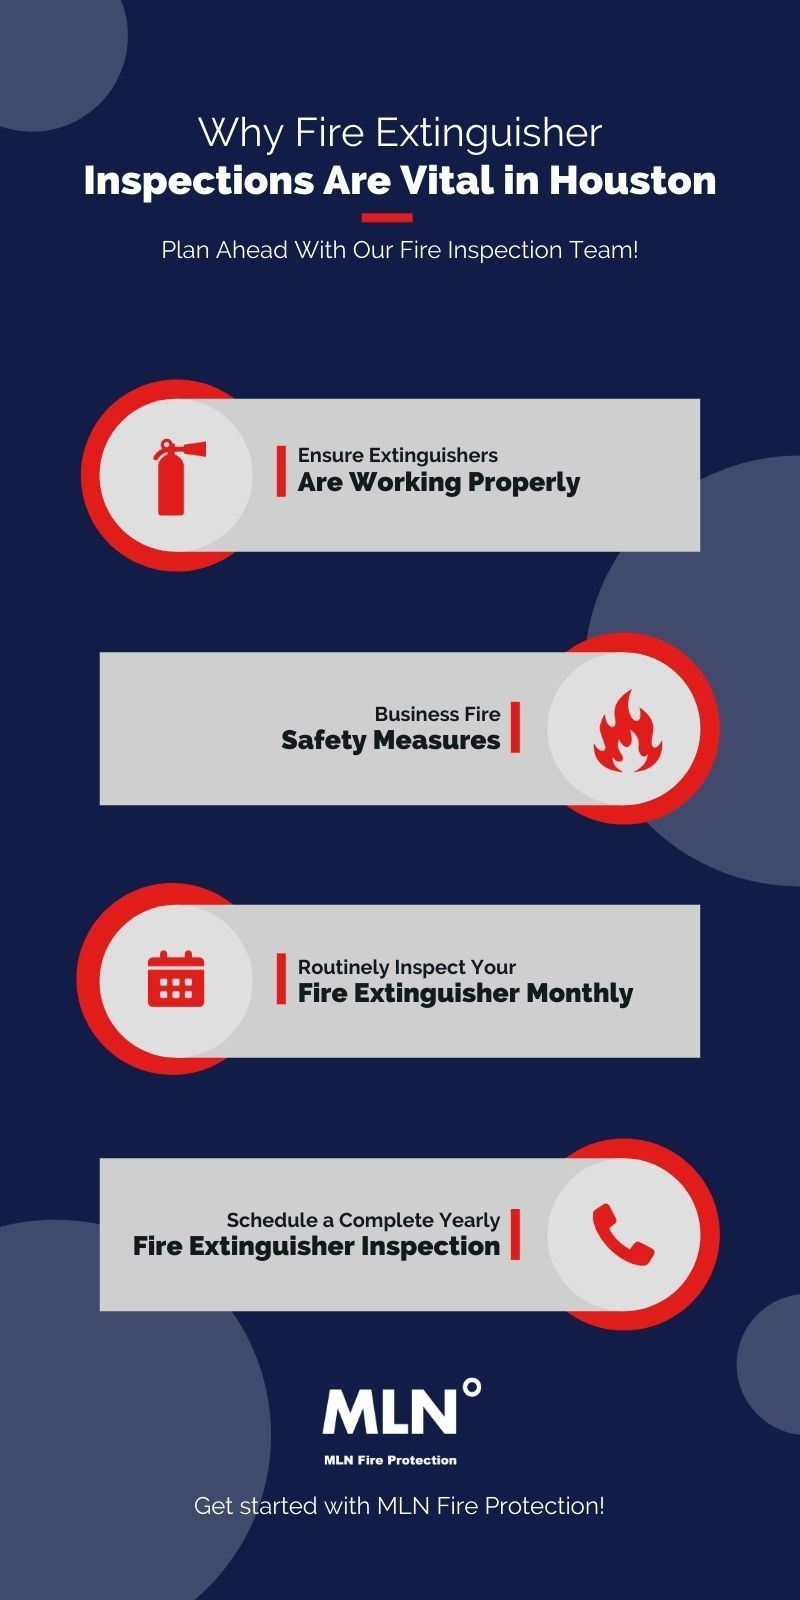 M10815 - MLN Company - Why Fire Extinguisher Inspections Are Vital in Houston.jpg